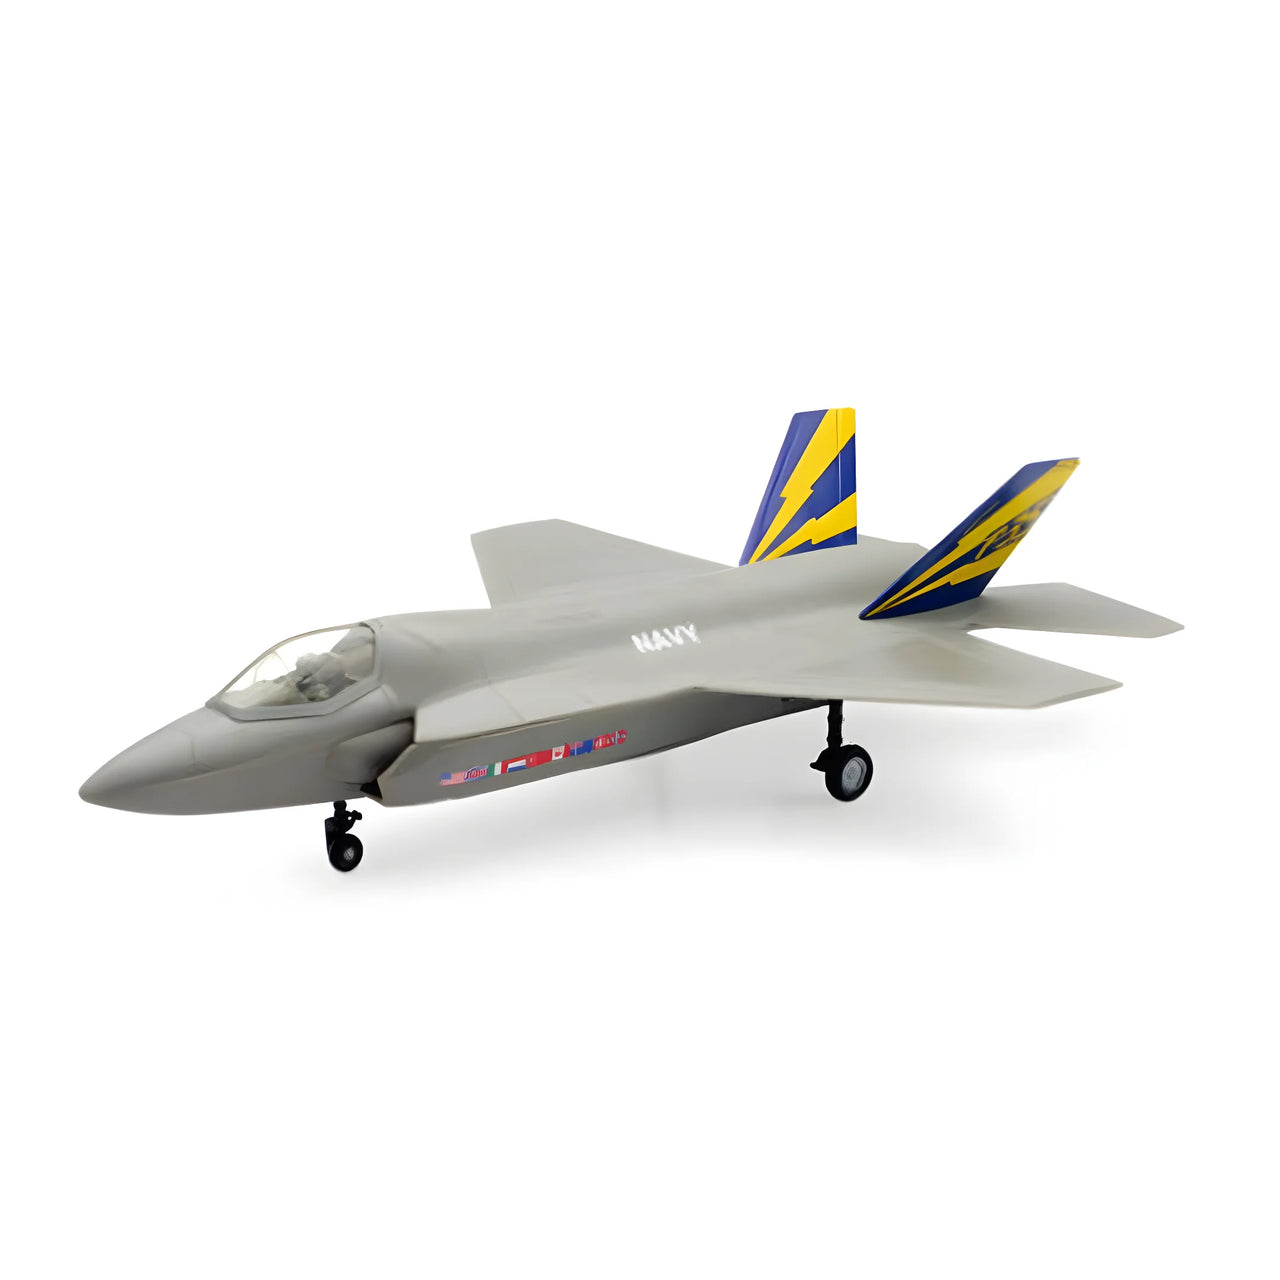 21377-C Lockheed F-35C Lightning New Ray Military Aircraft Scale 1:200 (Discontinued Model)